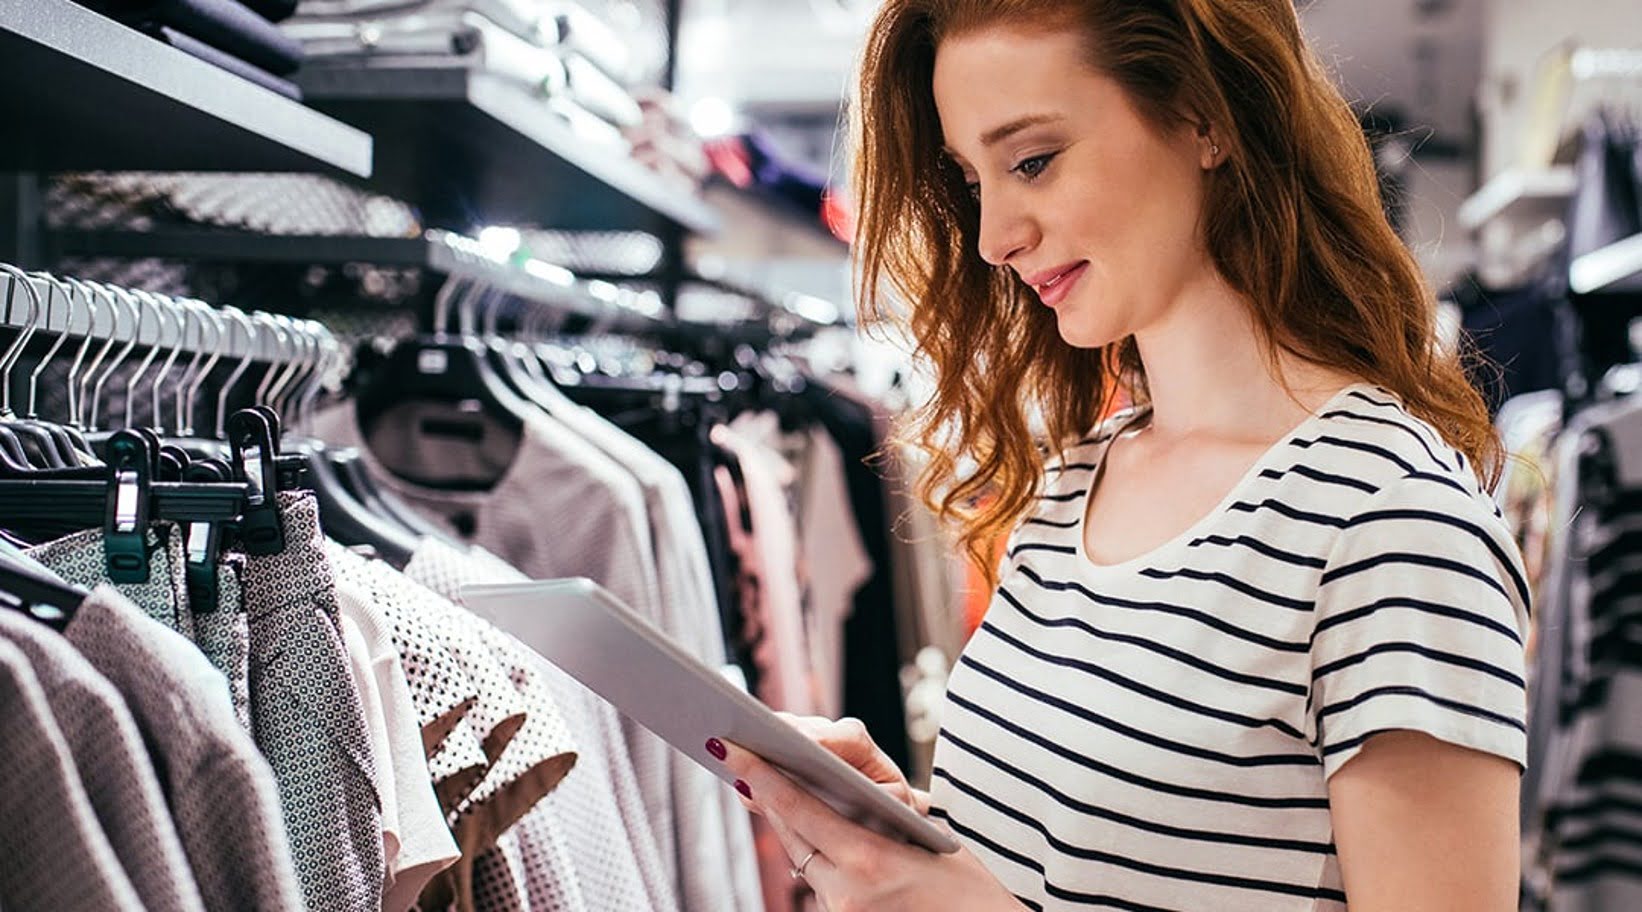 Retail success means data sharing